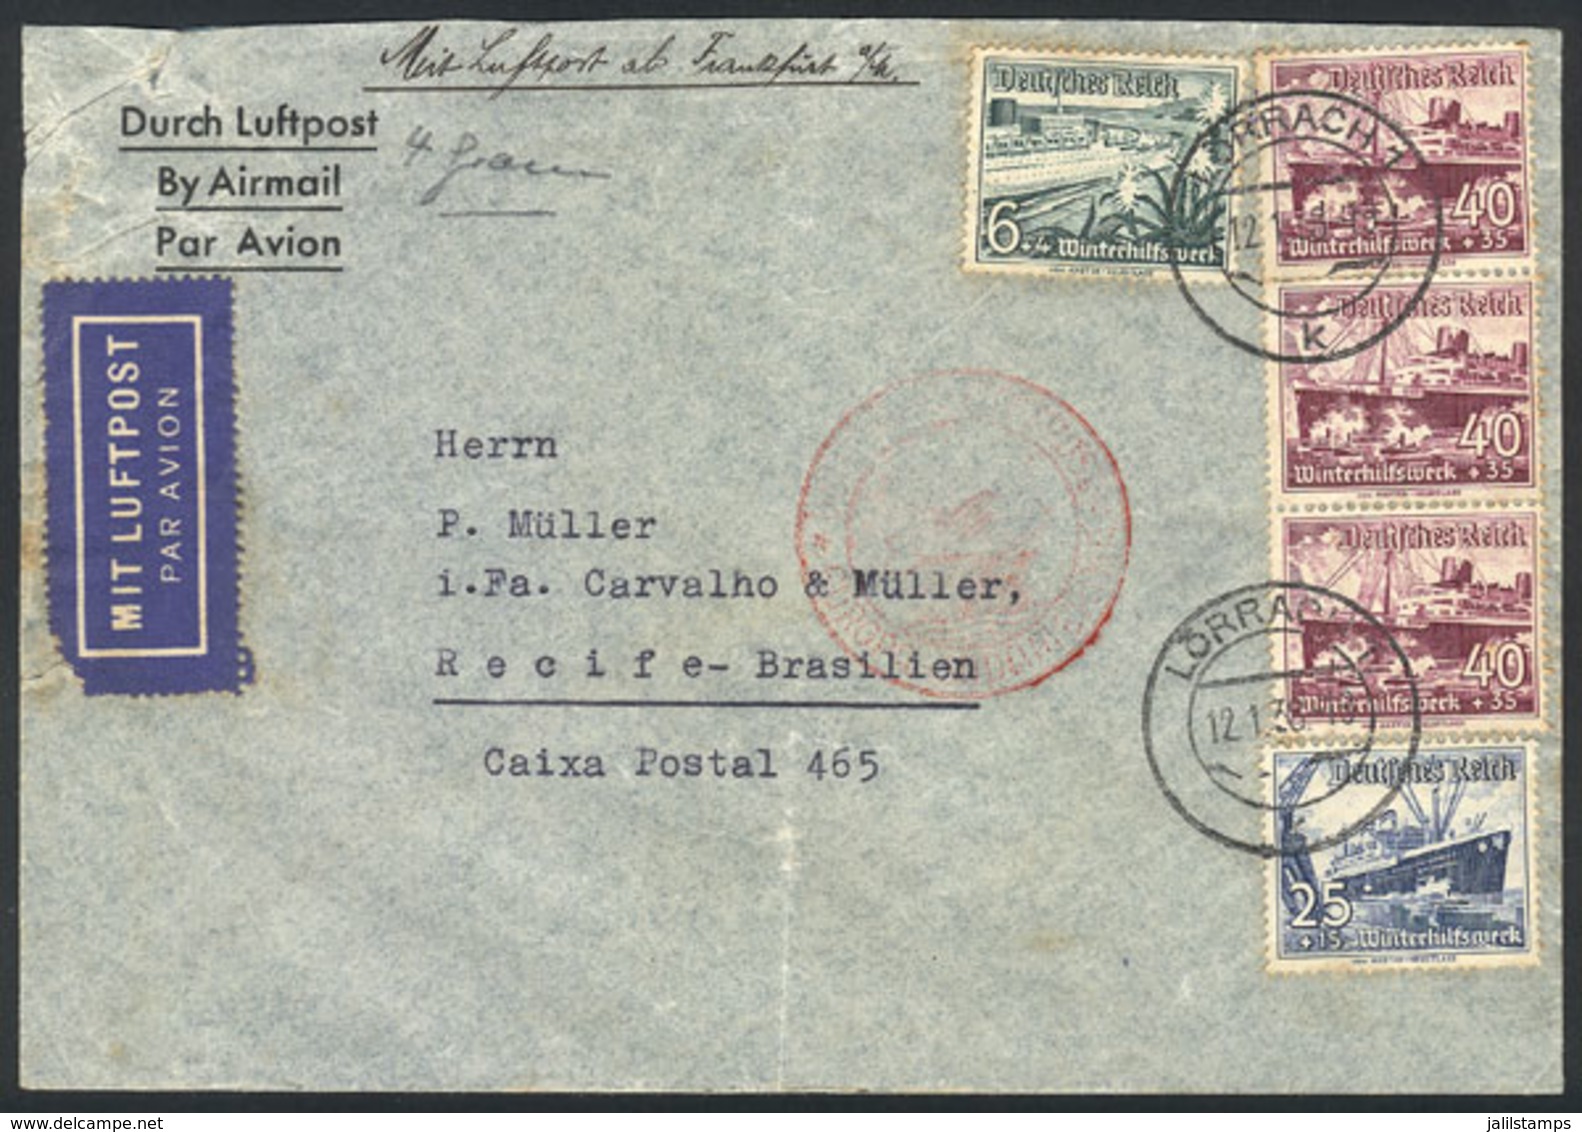 GERMANY: Airmail Cover Sent From Lörrach To Recife (Brazil) On 12/JA/1938, With Very Nice Commemorative Postage! - [Voorlopers